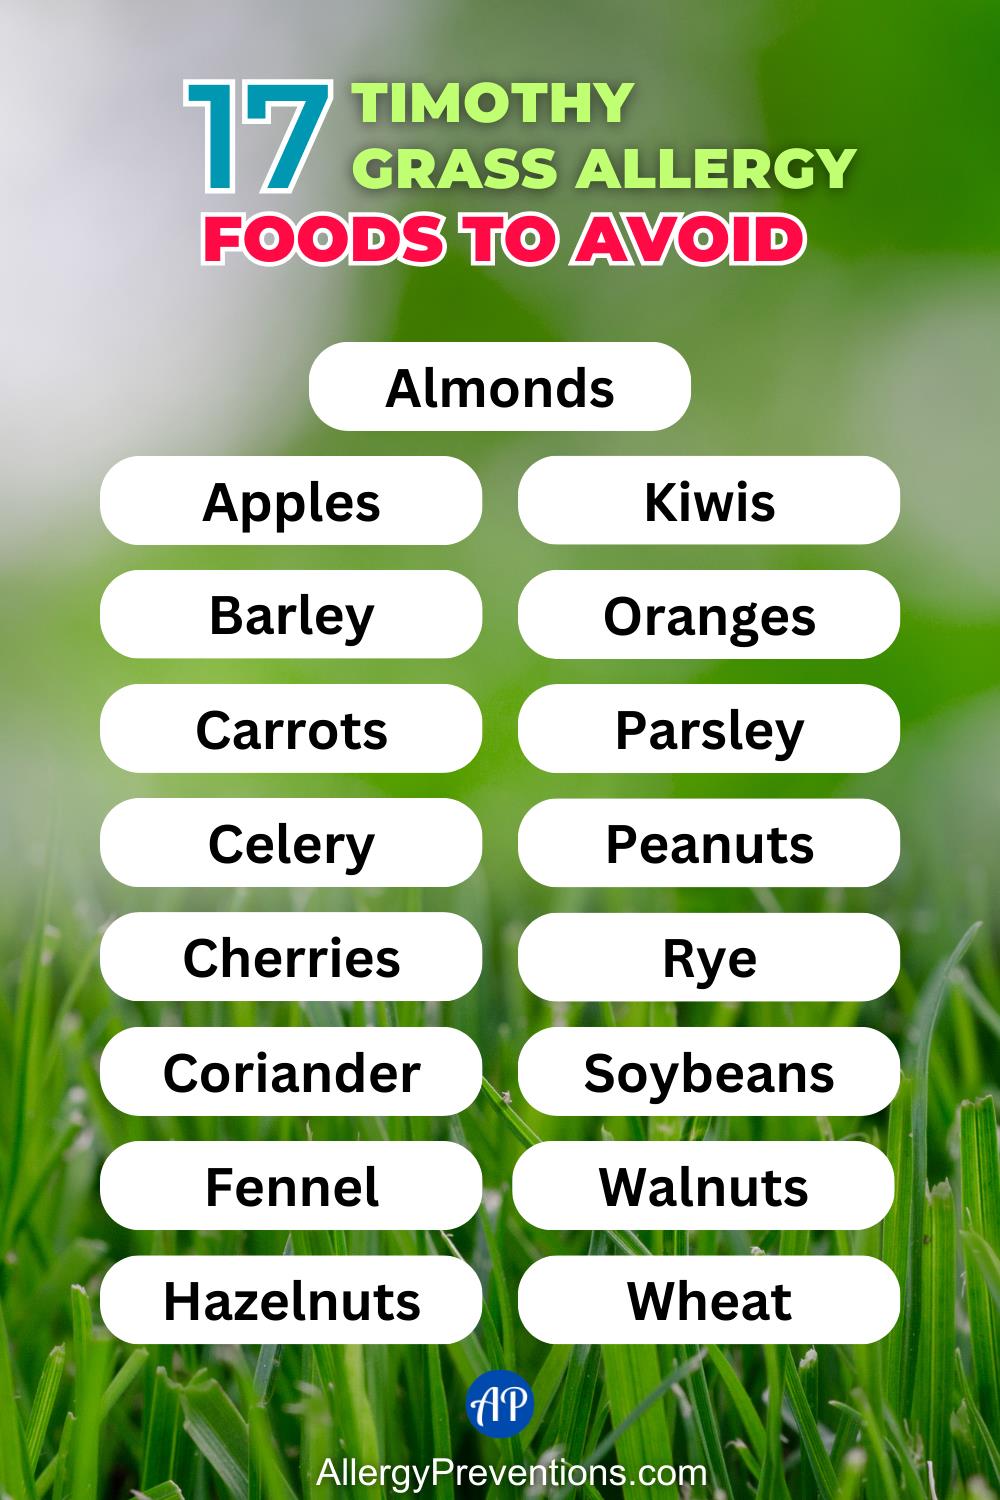 Timothy grass allergy foods to avoid infographic list. These foods may need to be avoided if you suffer from timothy grass allergies: Almonds, apples, barley, carrots, celery, cherries, coriander, fennel, hazelnuts, kiwis, oranges, parsley, peanuts, rye, soybeans, walnuts, and wheat.